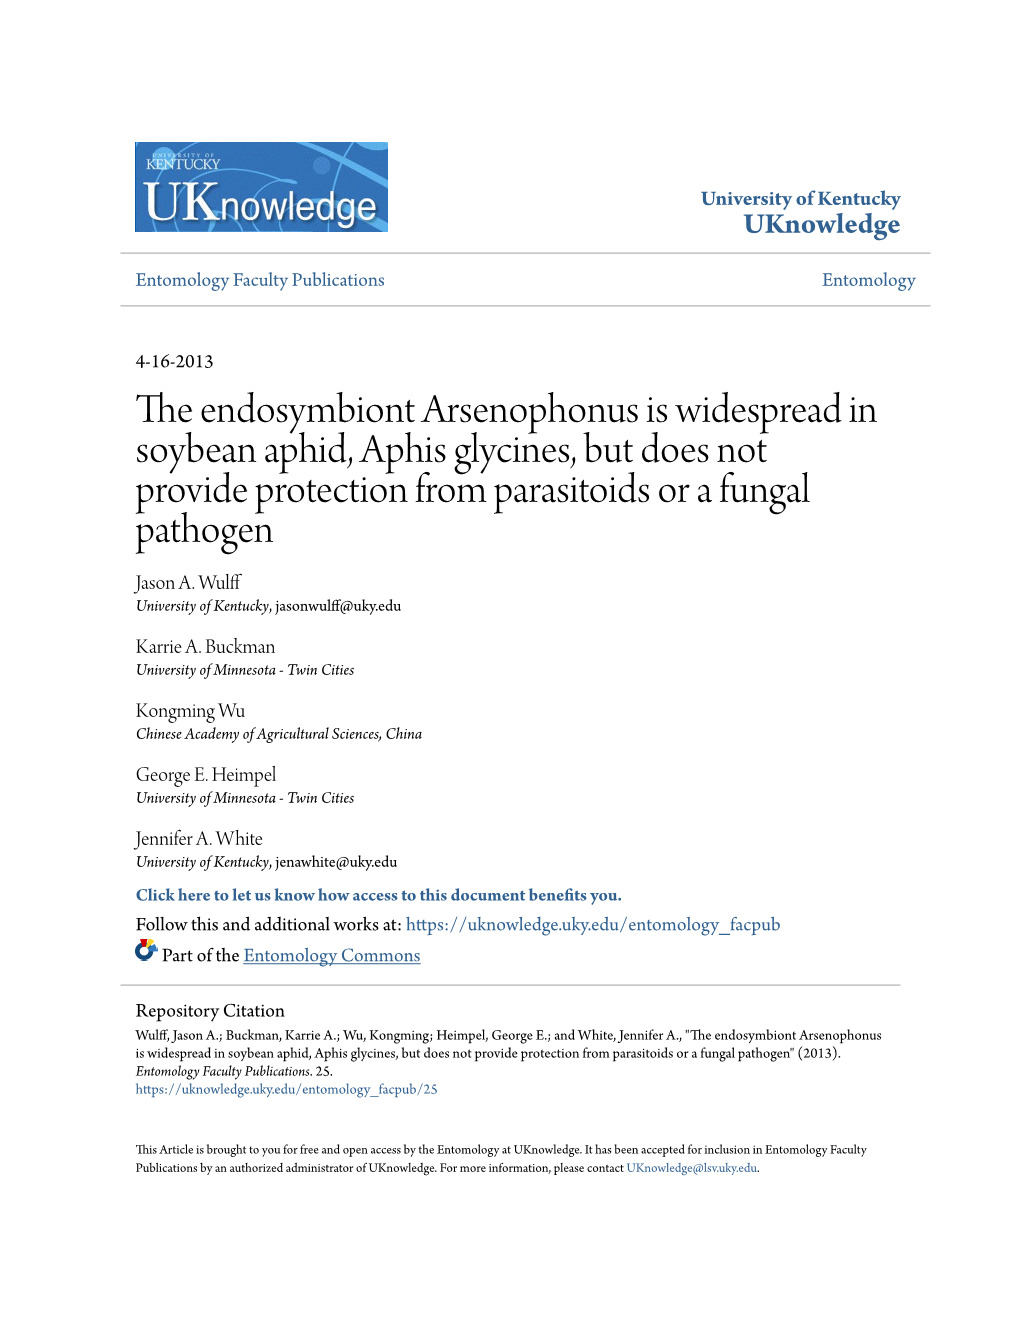 The Endosymbiont Arsenophonus Is Widespread in Soybean Aphid, Aphis Glycines, but Does Not Provide Protection from Parasitoids Or a Fungal Pathogen